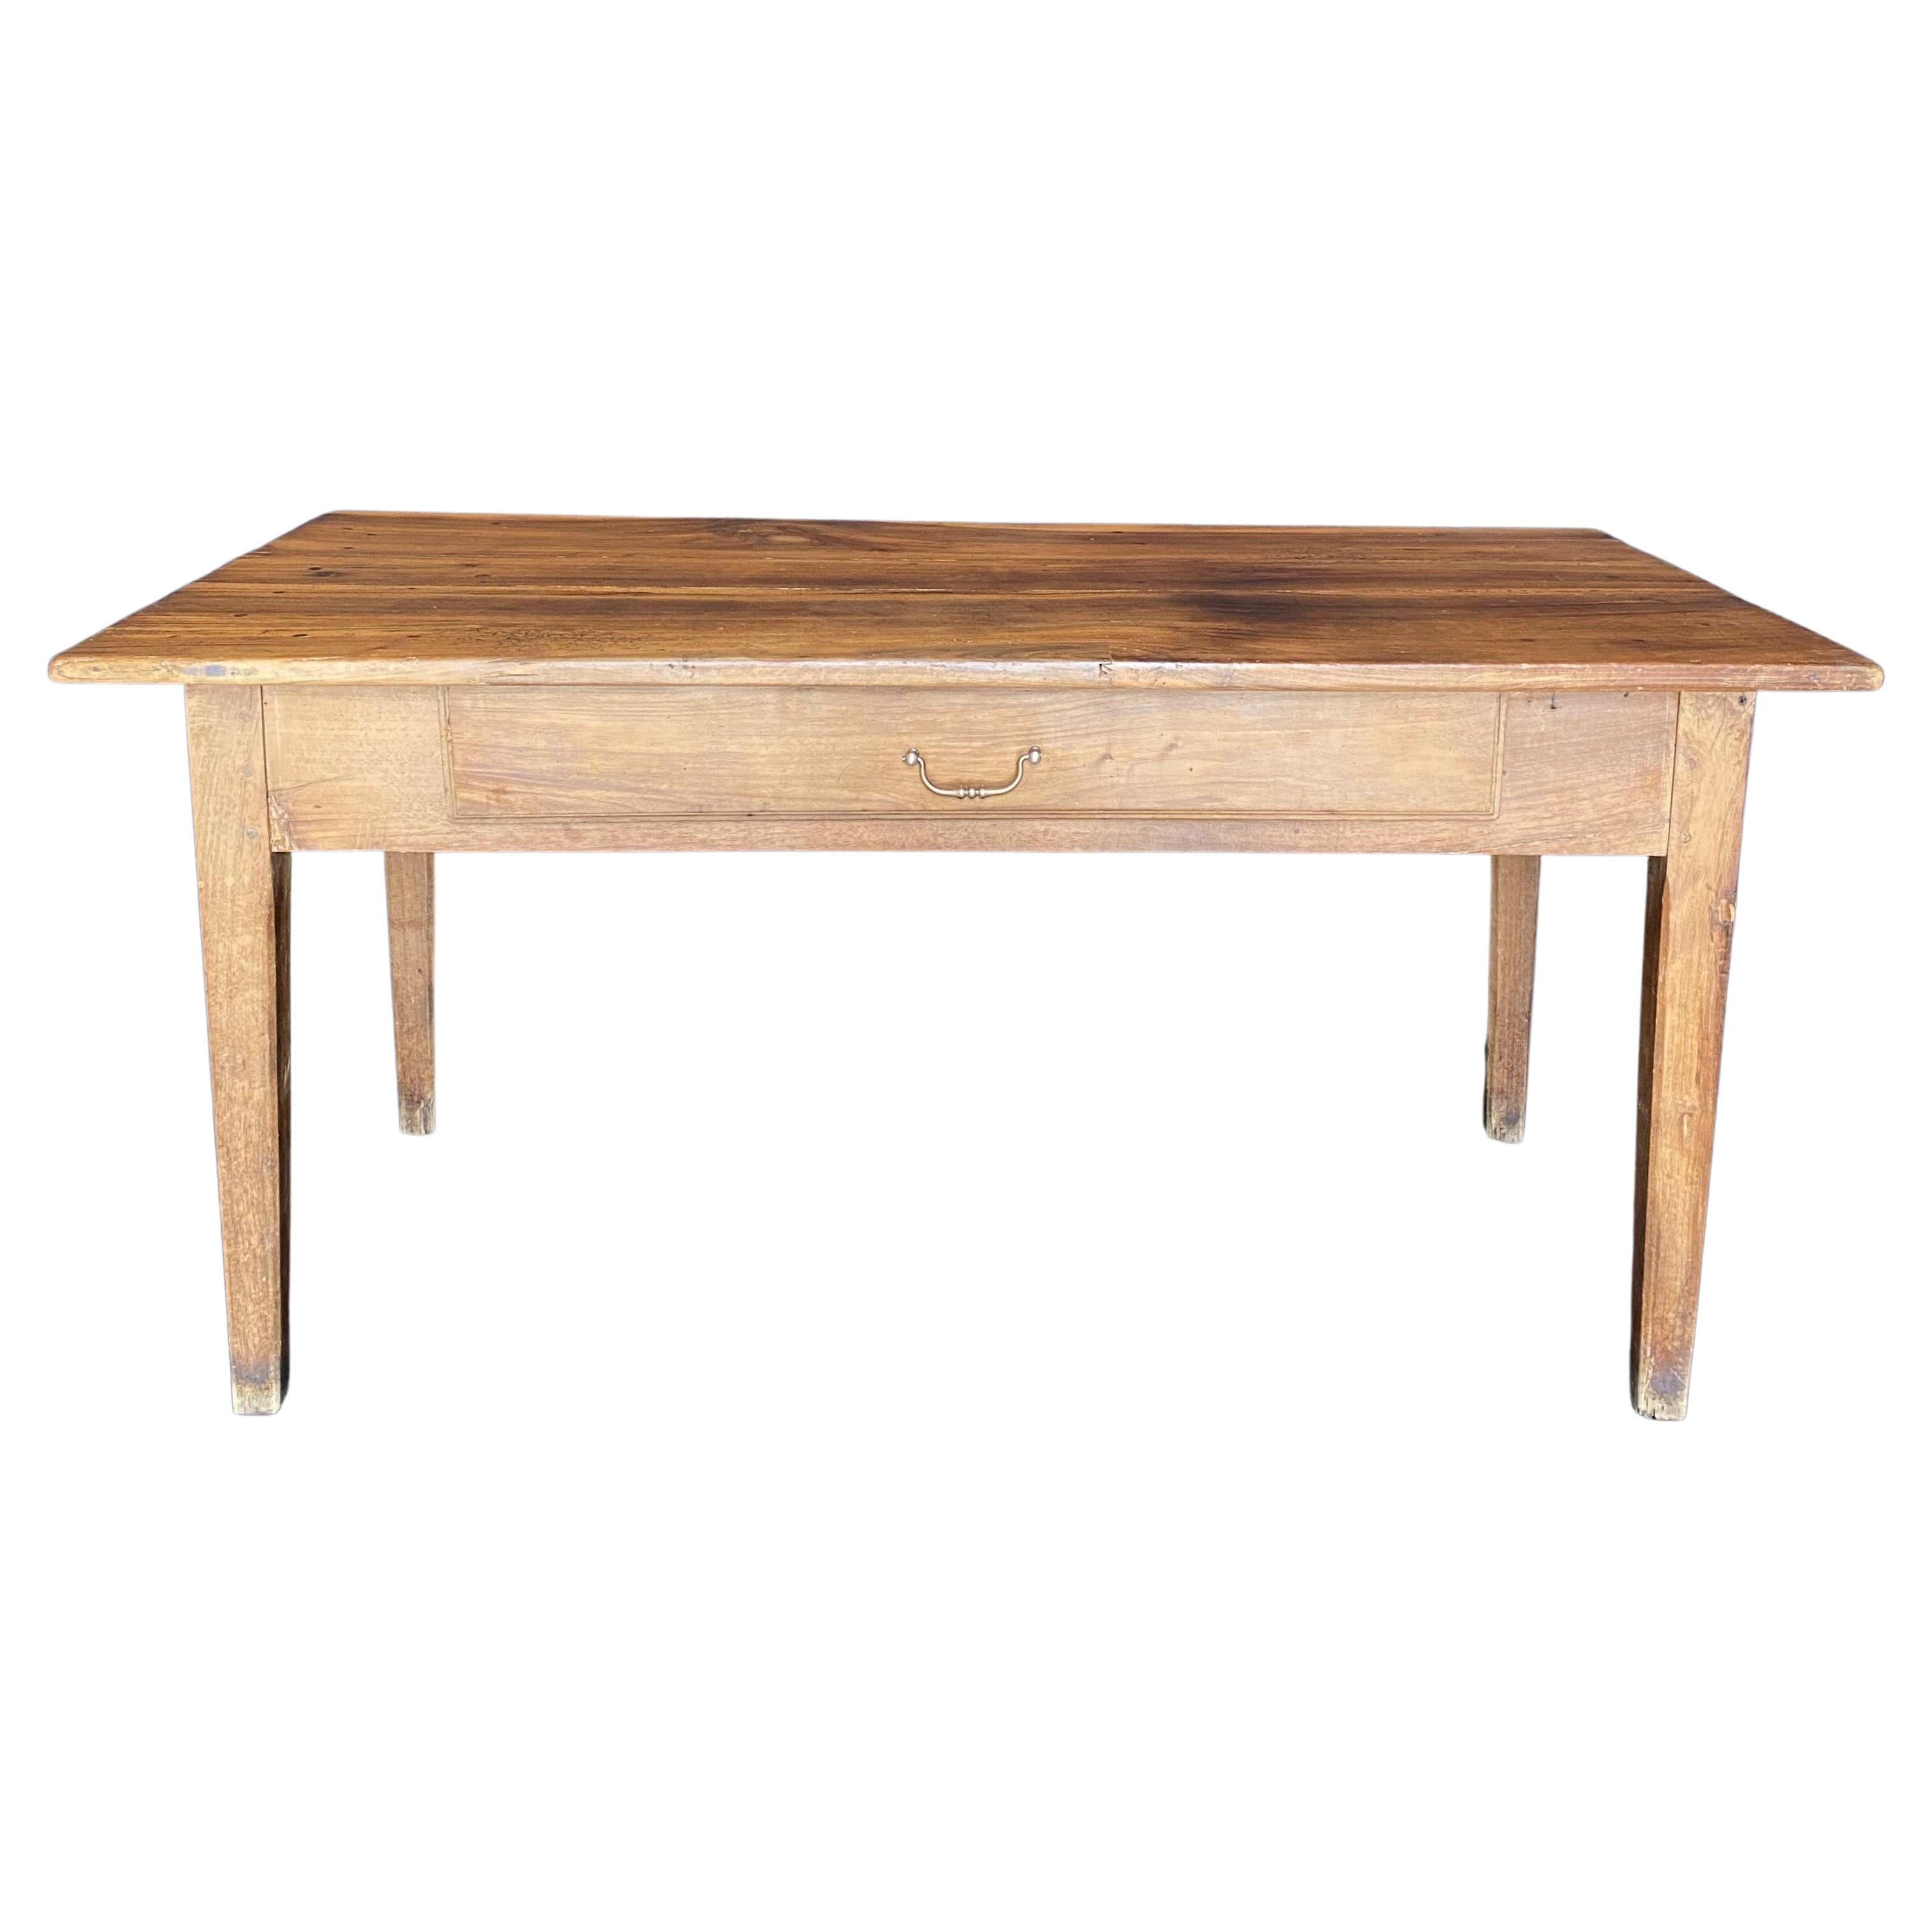 Classic Early 19th Century Walnut Dining Table or Desk